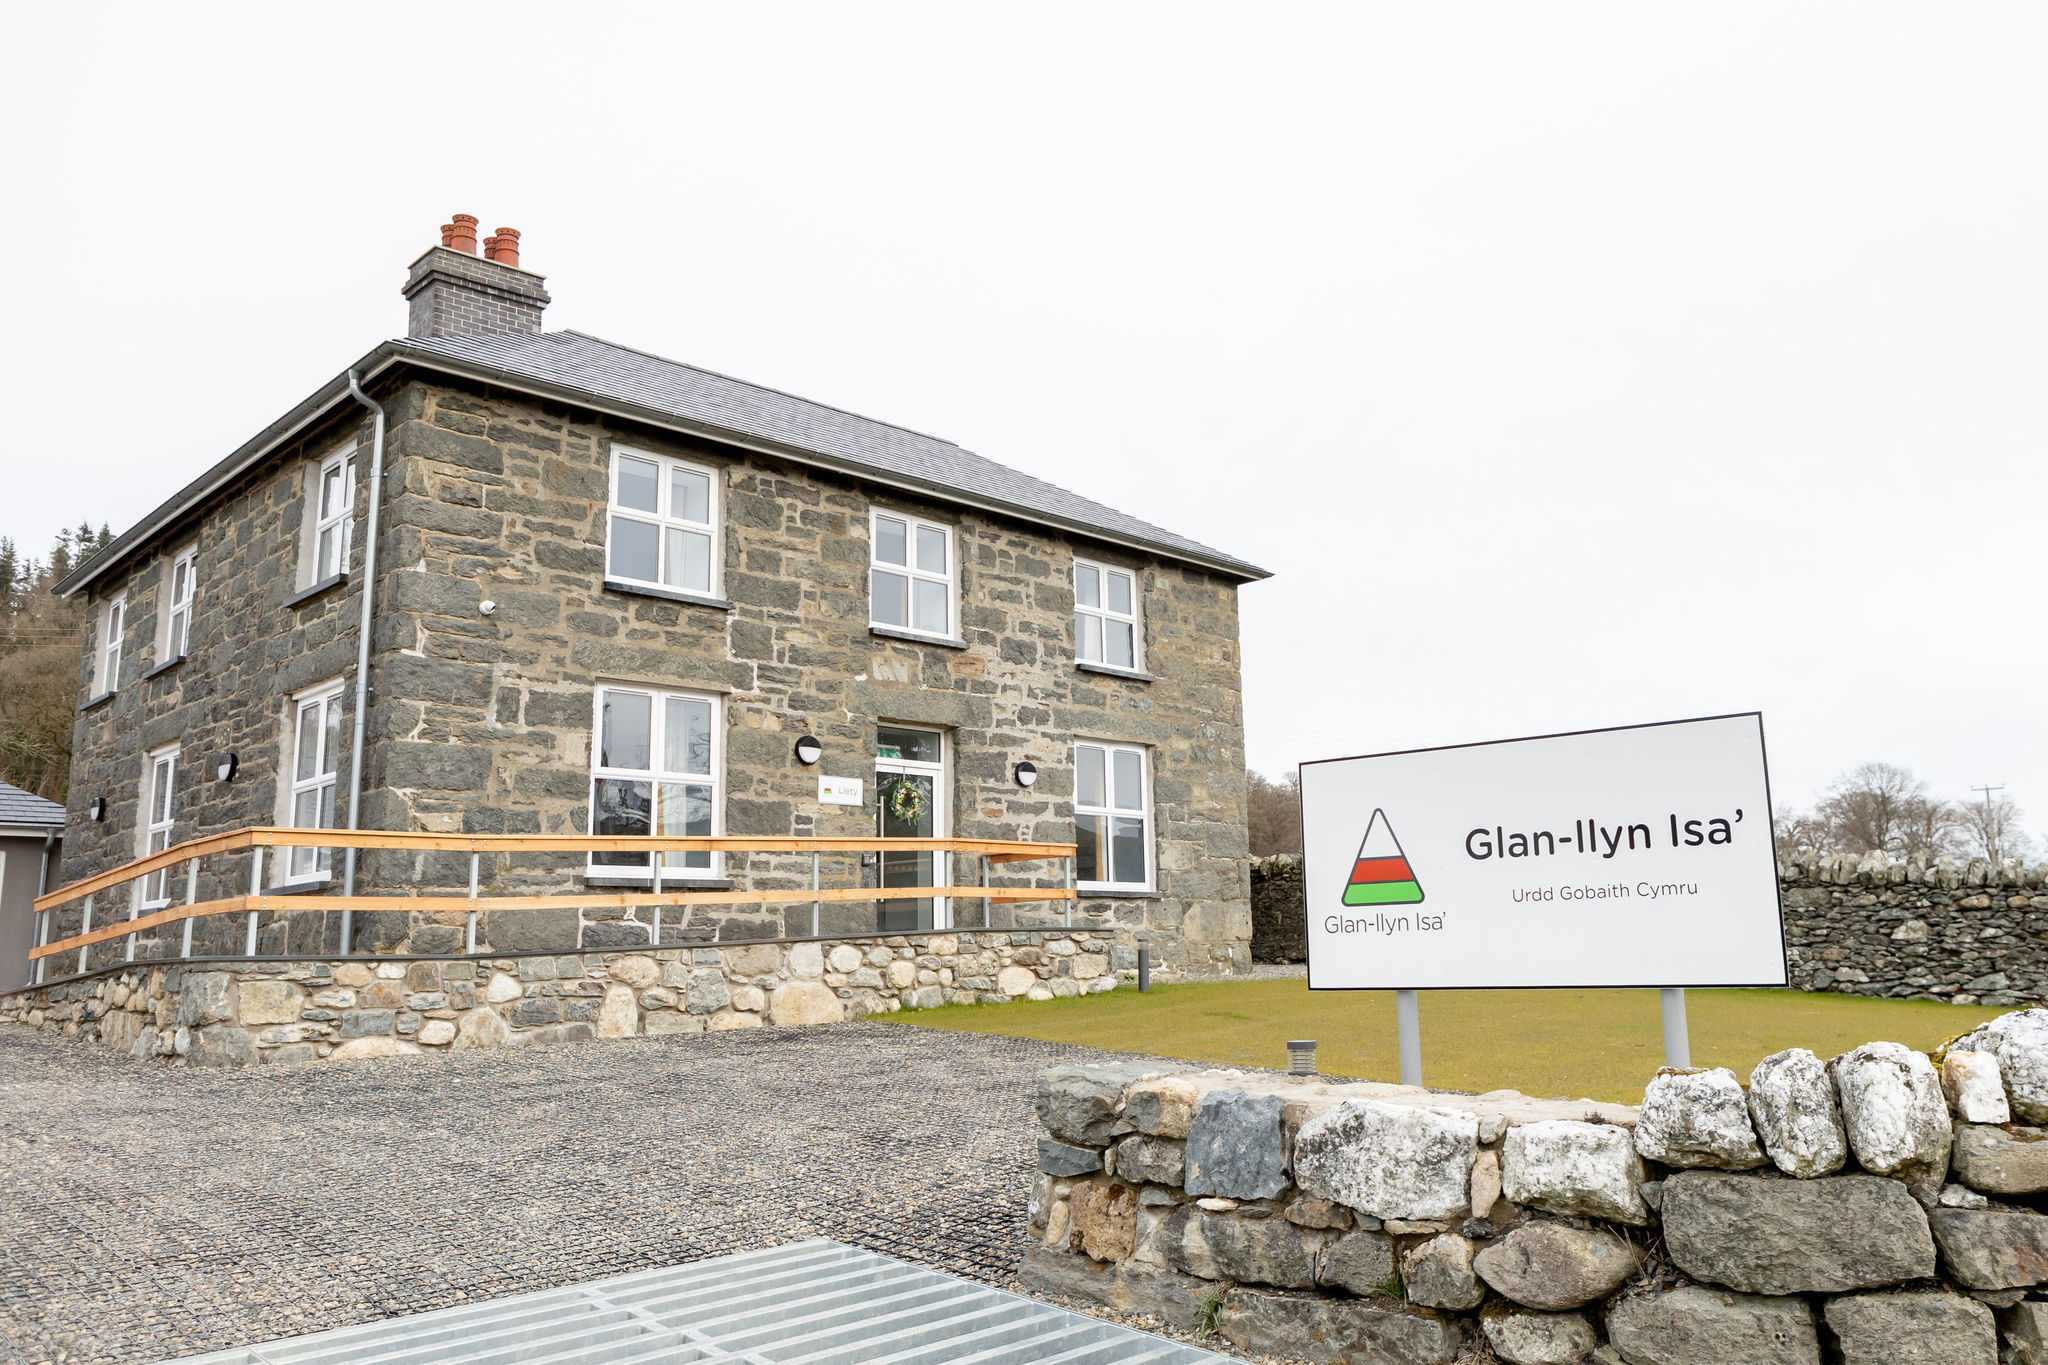 Welcome to Glan-llyn Isa - An independent outdoor Centre on the shore of Llyn Tegid